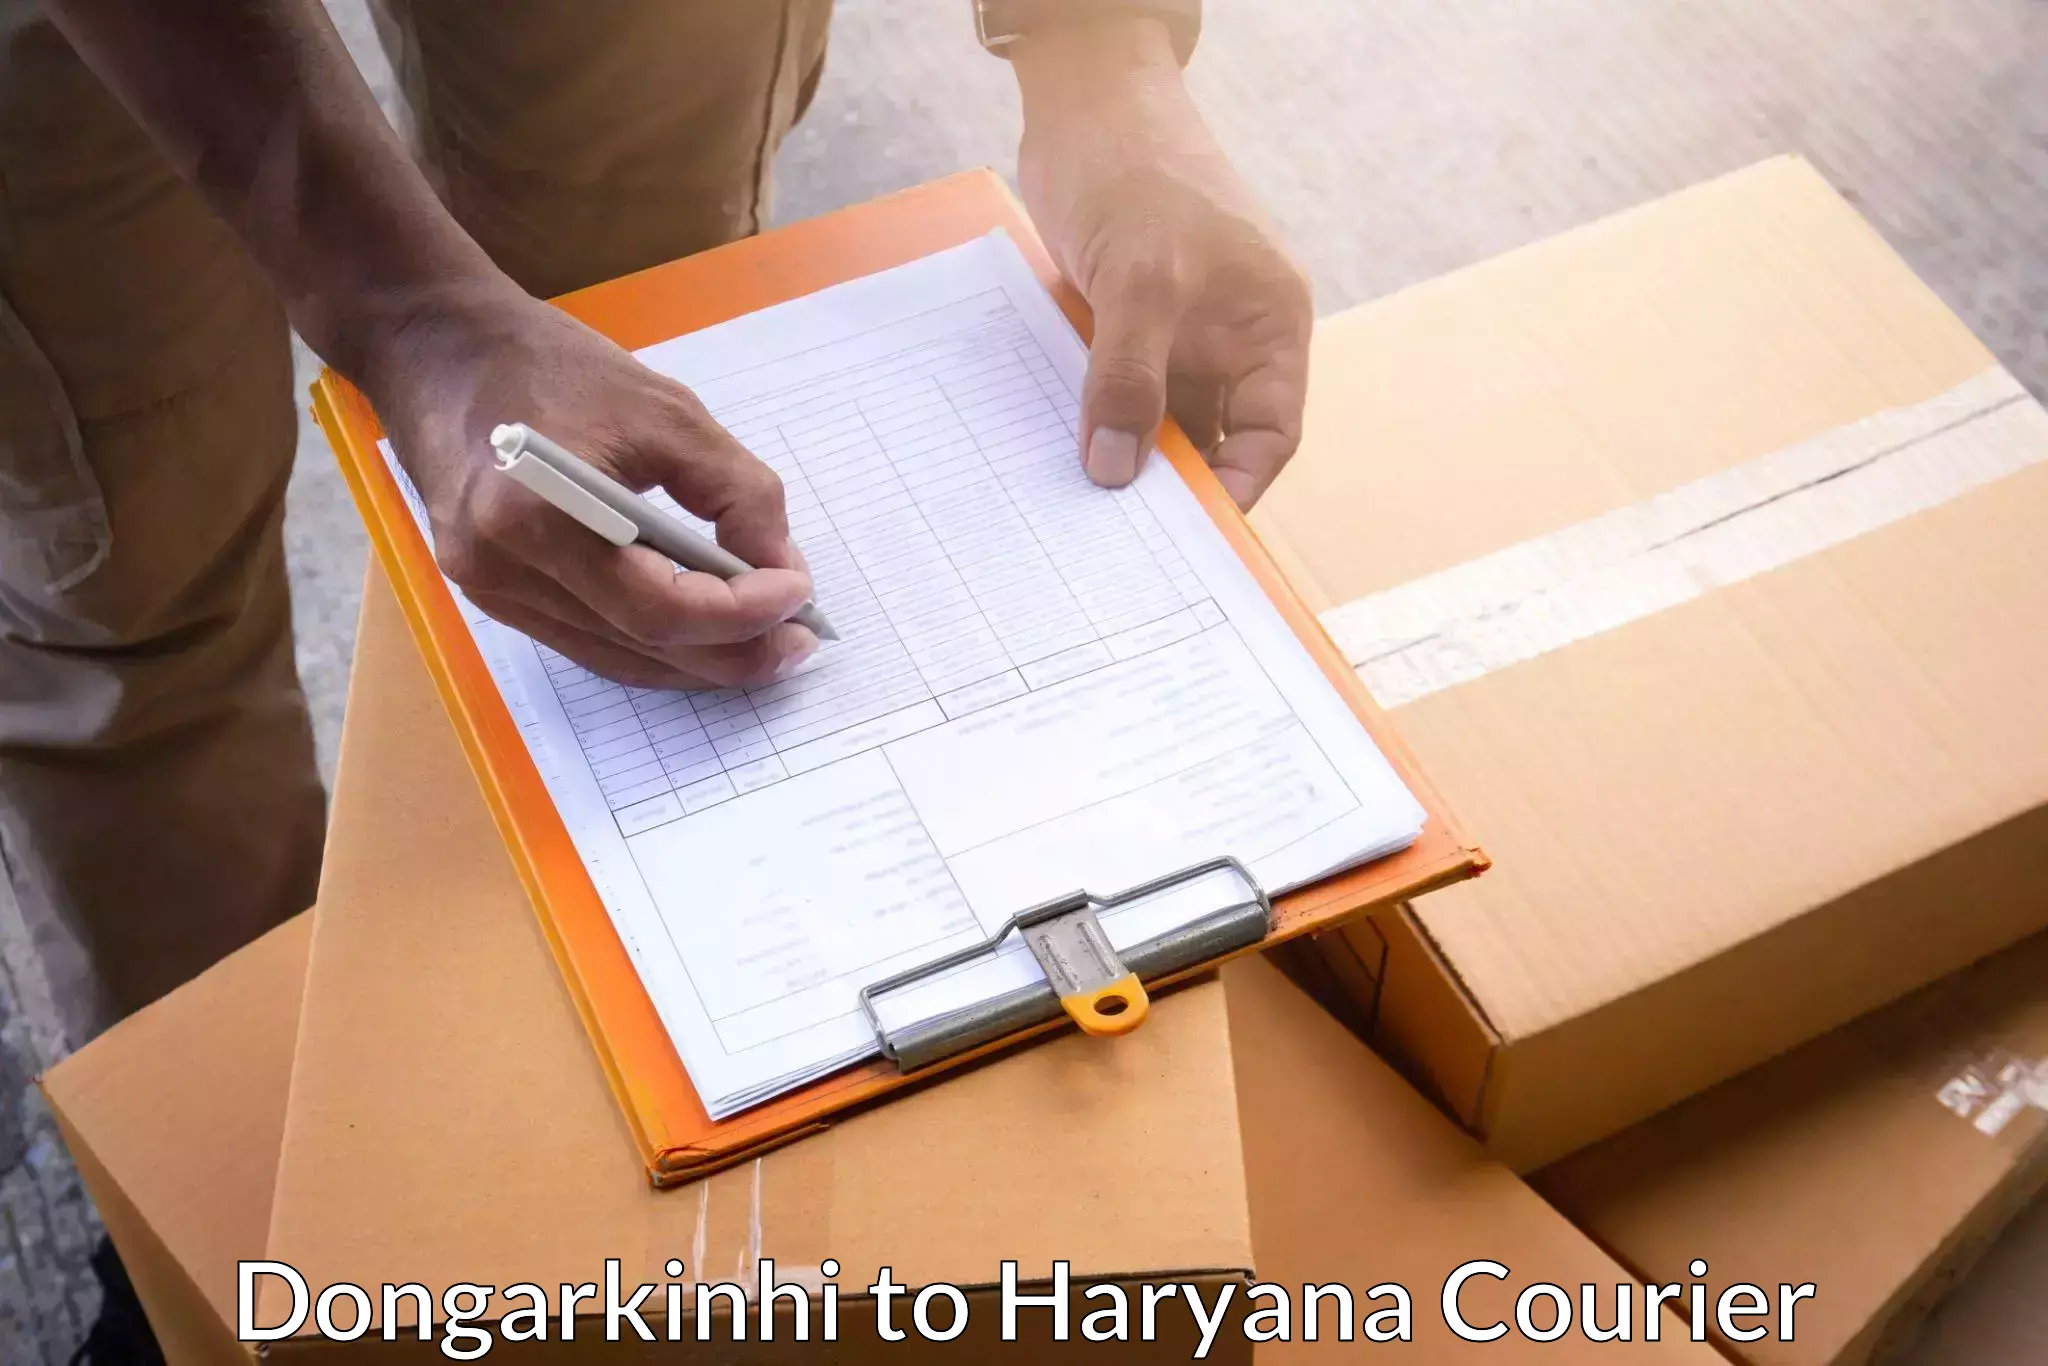 Nationwide parcel services Dongarkinhi to Jhajjar